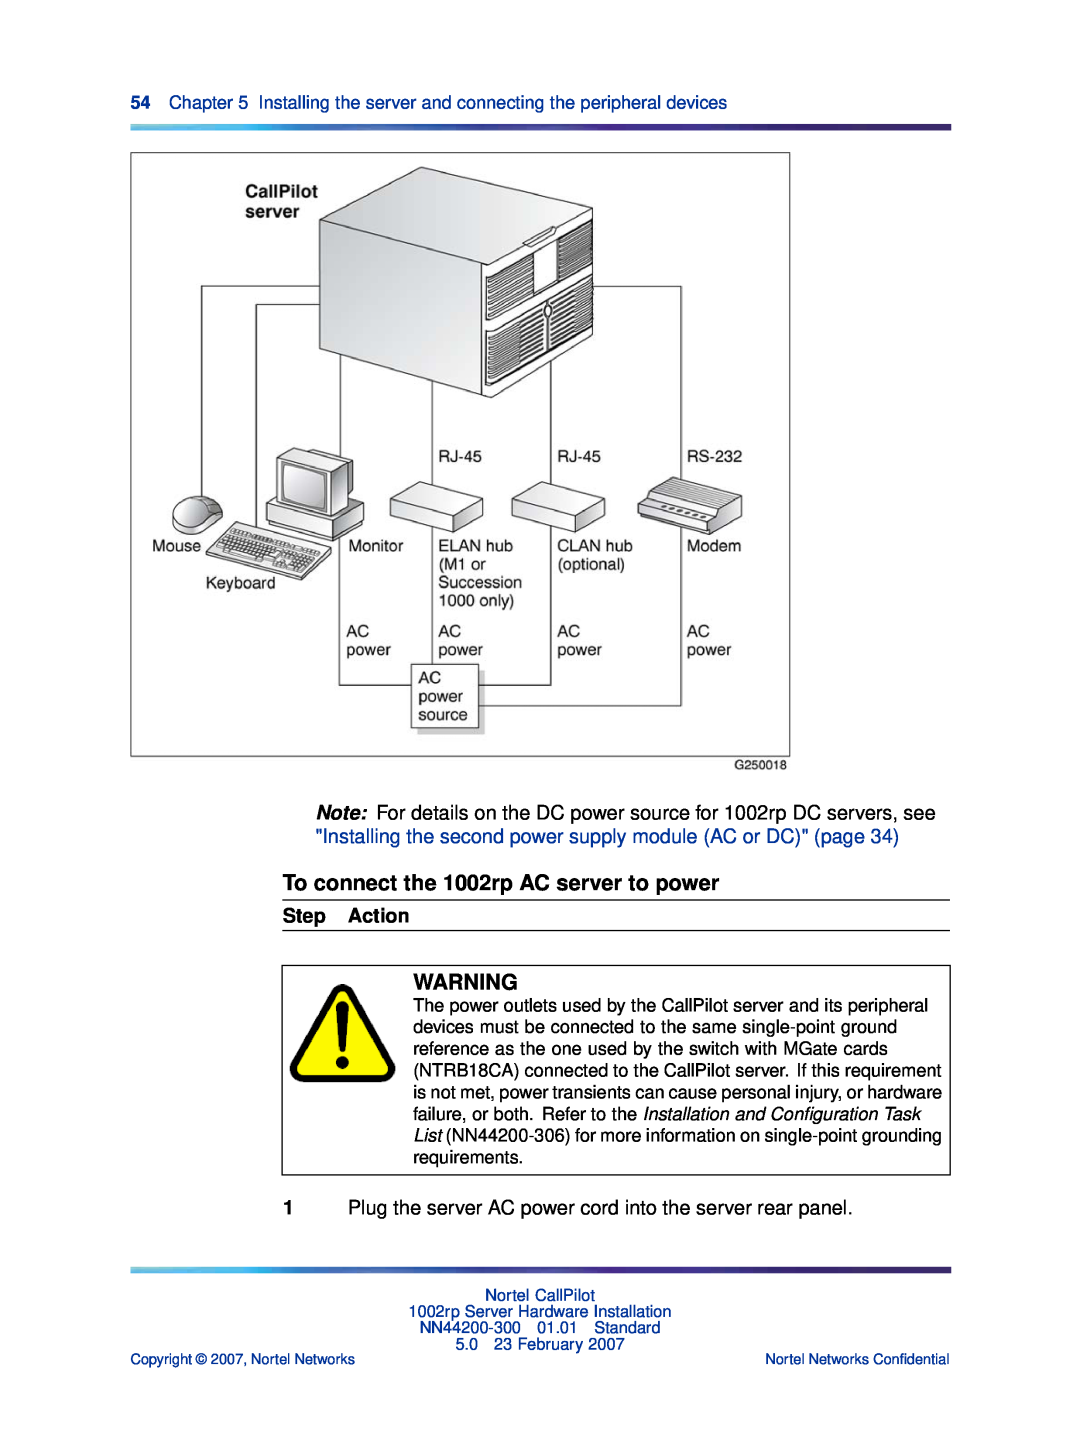 Nortel Networks NN44200-300 manual To connect the 1002rp AC server to power, Step Action 